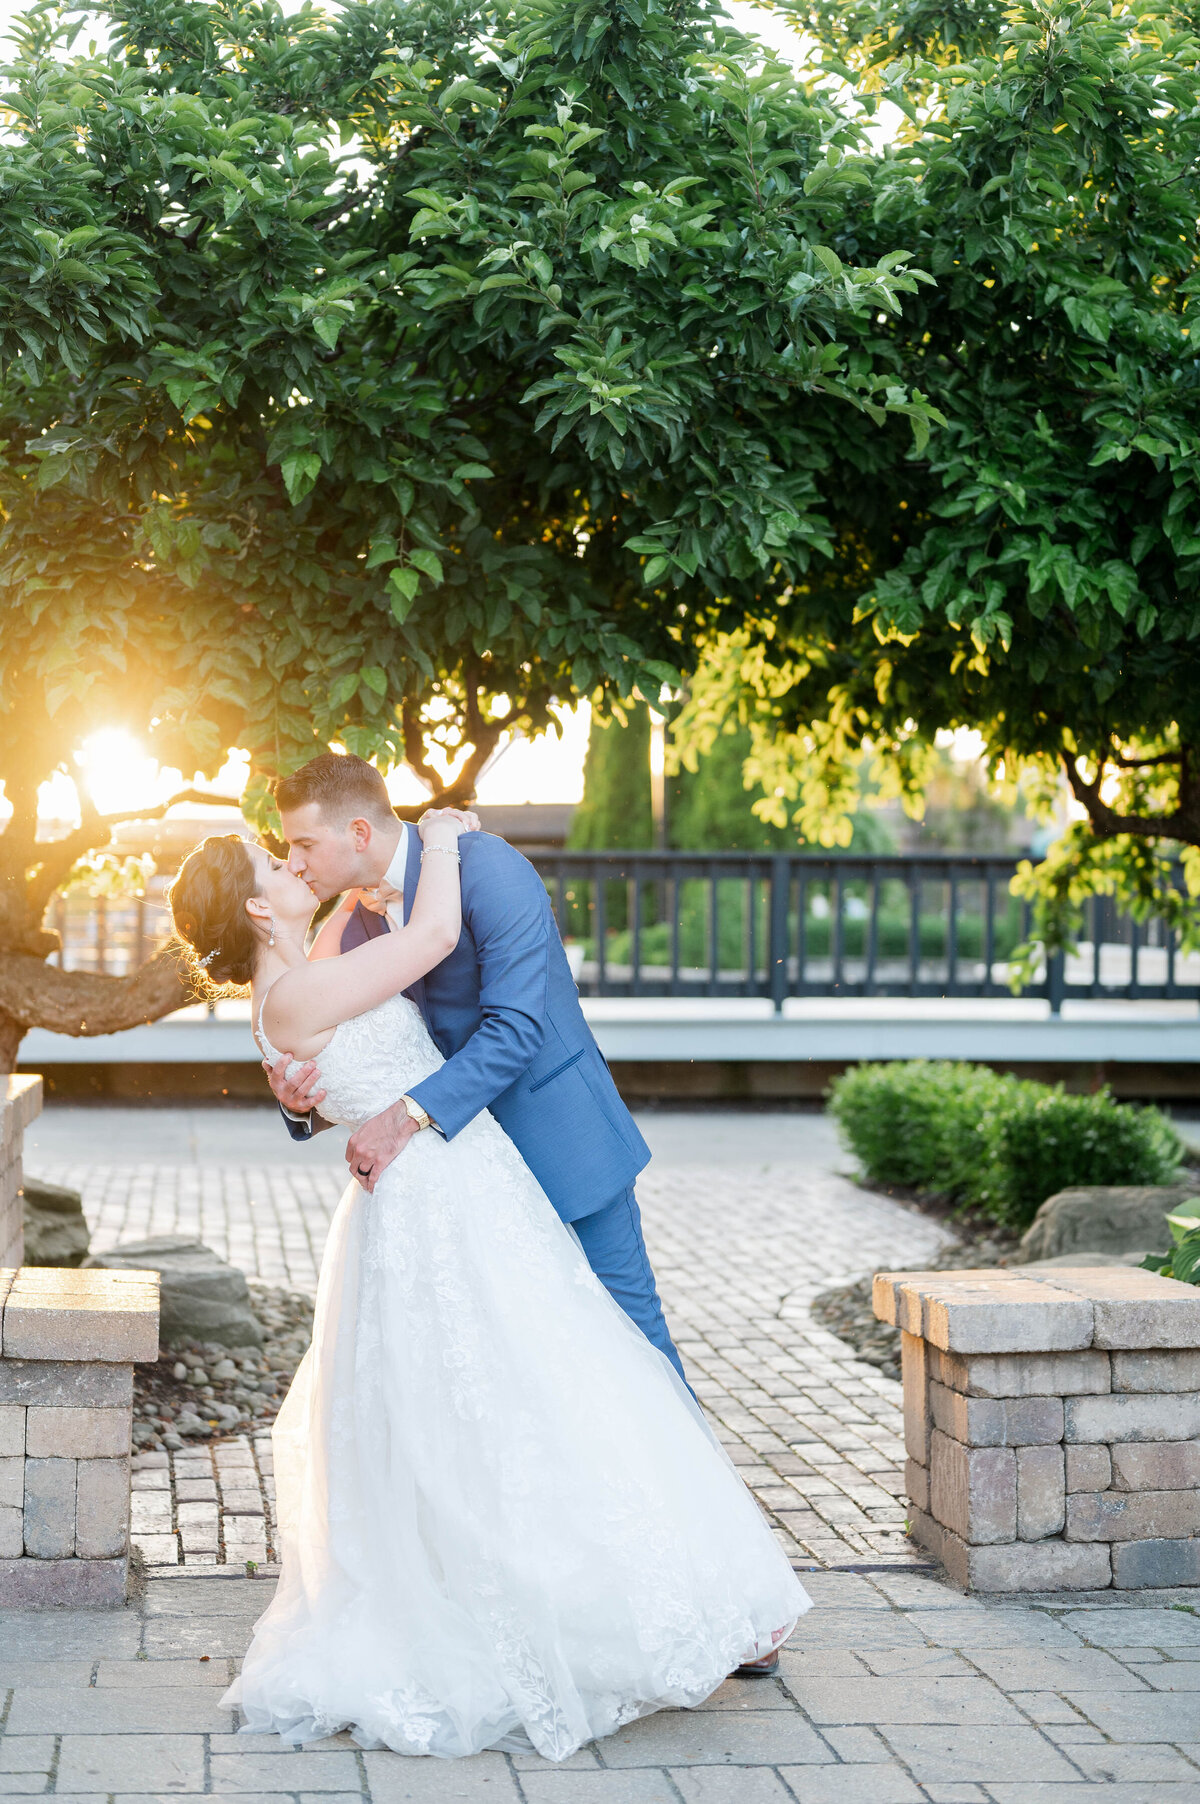 photography for weddings at sunset in cleveland ohio